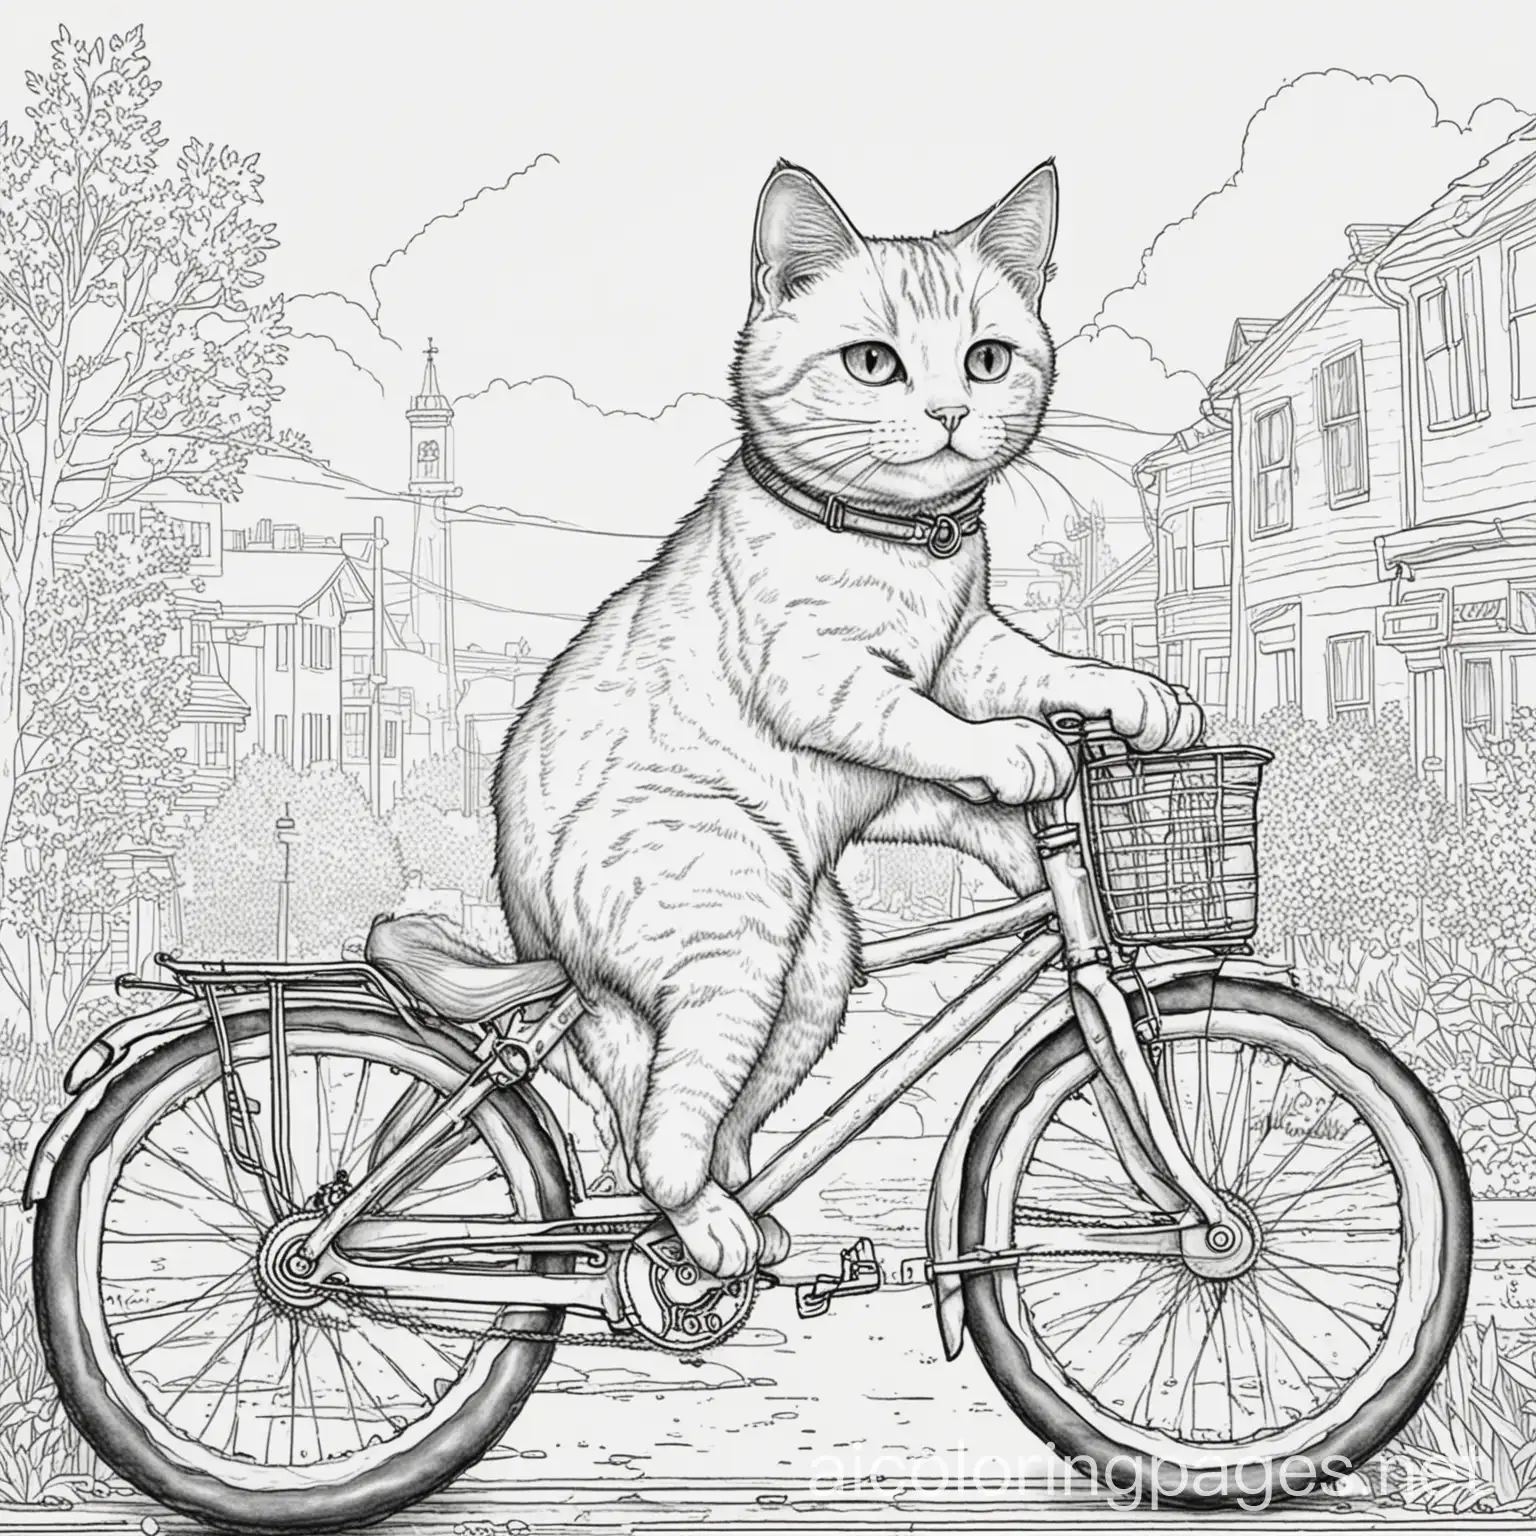 A cat riding a bike in Portland., Coloring Page, black and white, line art, white background, Simplicity, Ample White Space. The background of the coloring page is plain white to make it easy for young children to color within the lines. The outlines of all the subjects are easy to distinguish, making it simple for kids to color without too much difficulty